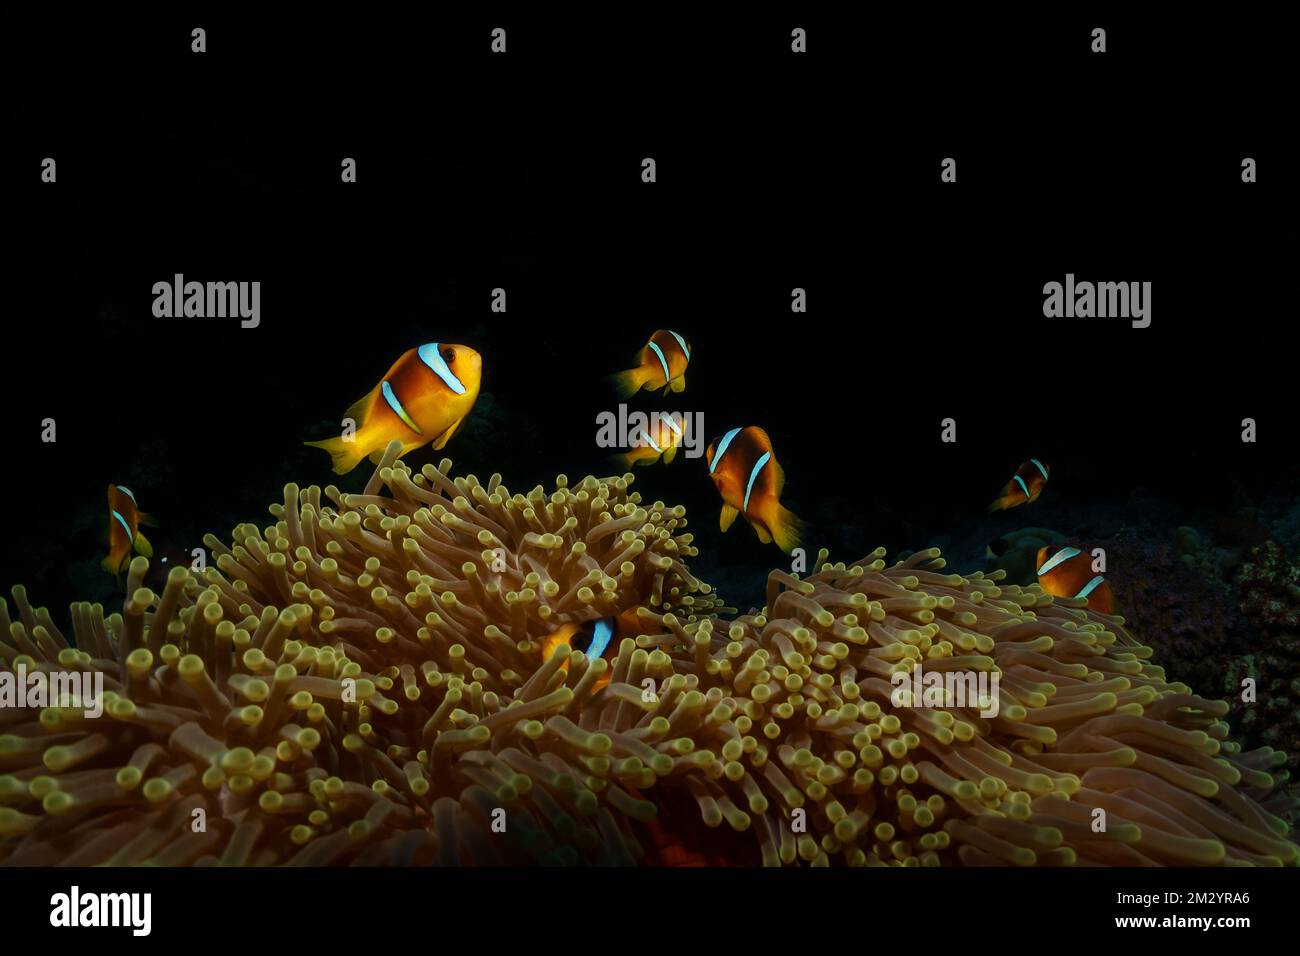 An isolated image on black background of a family of anemone fish happily living in their habitat on the bottom of the coral reef. Stock Photo